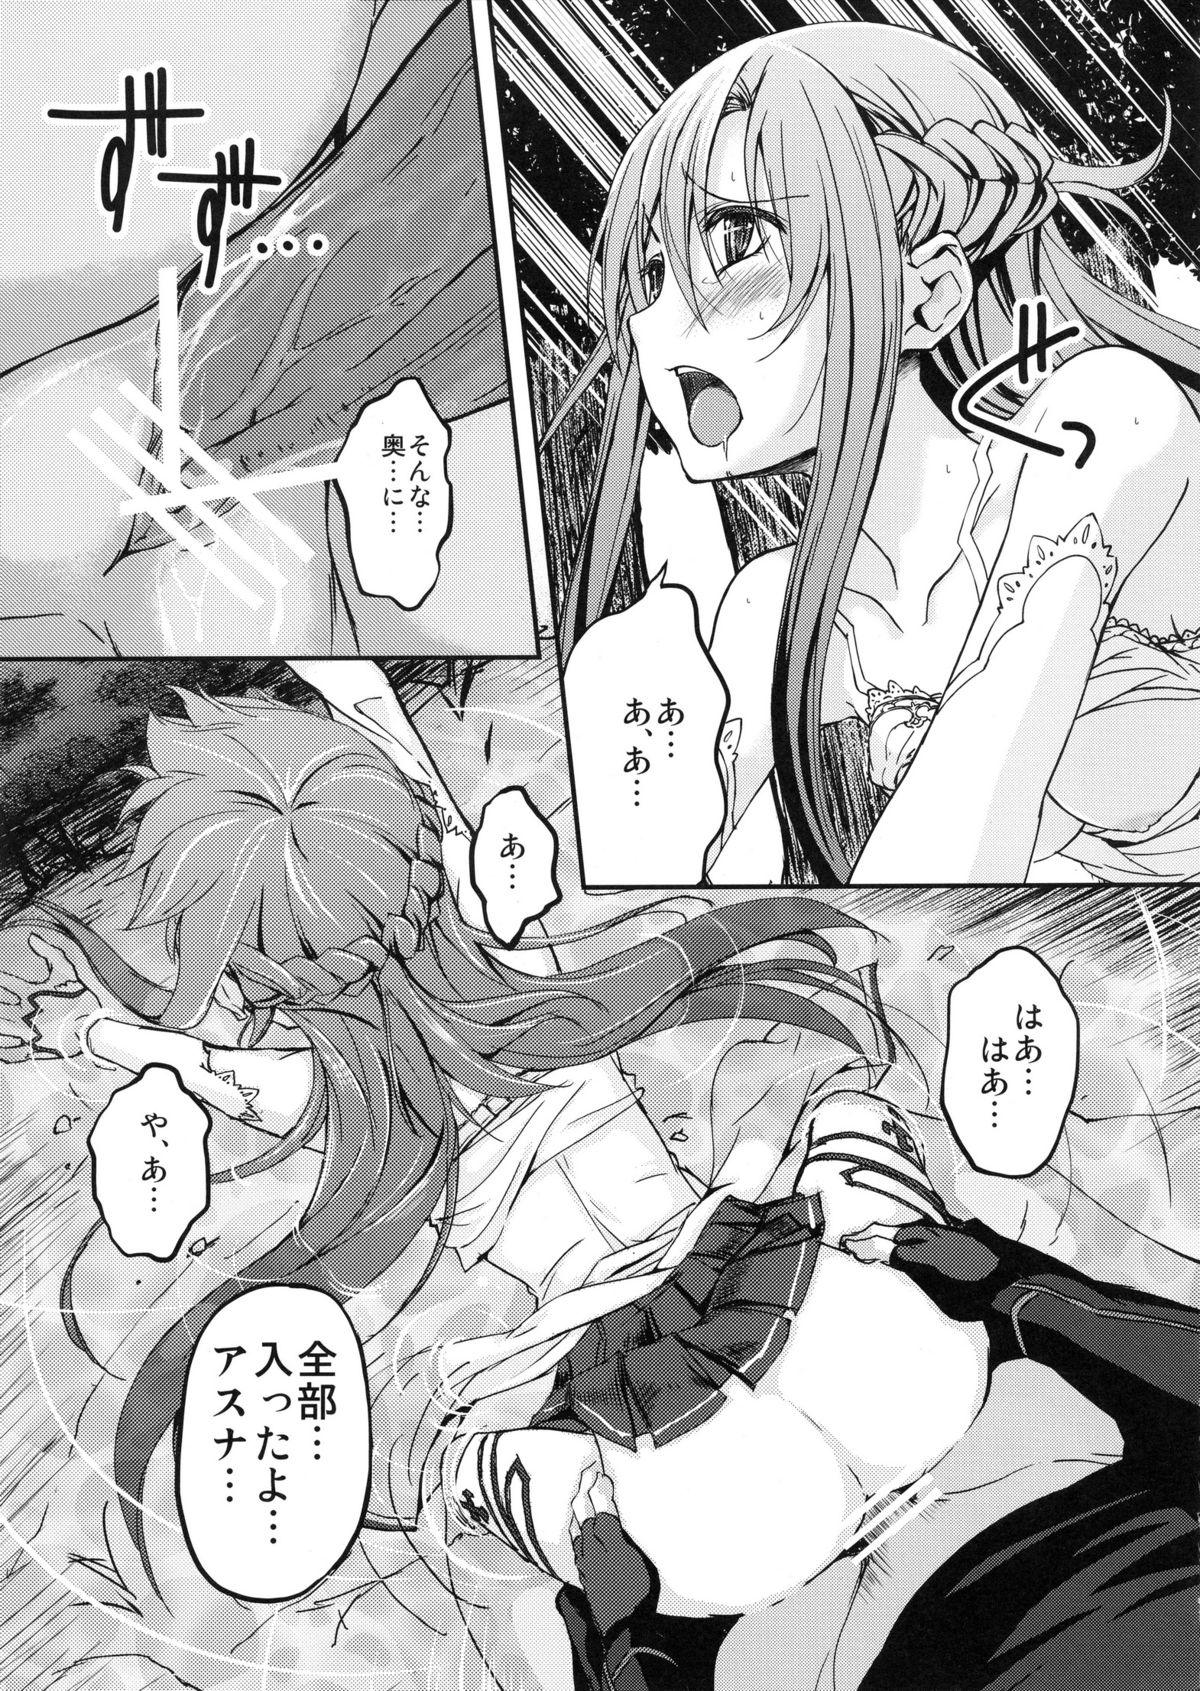 Toys Marriage Experience - Sword art online Gemendo - Page 8